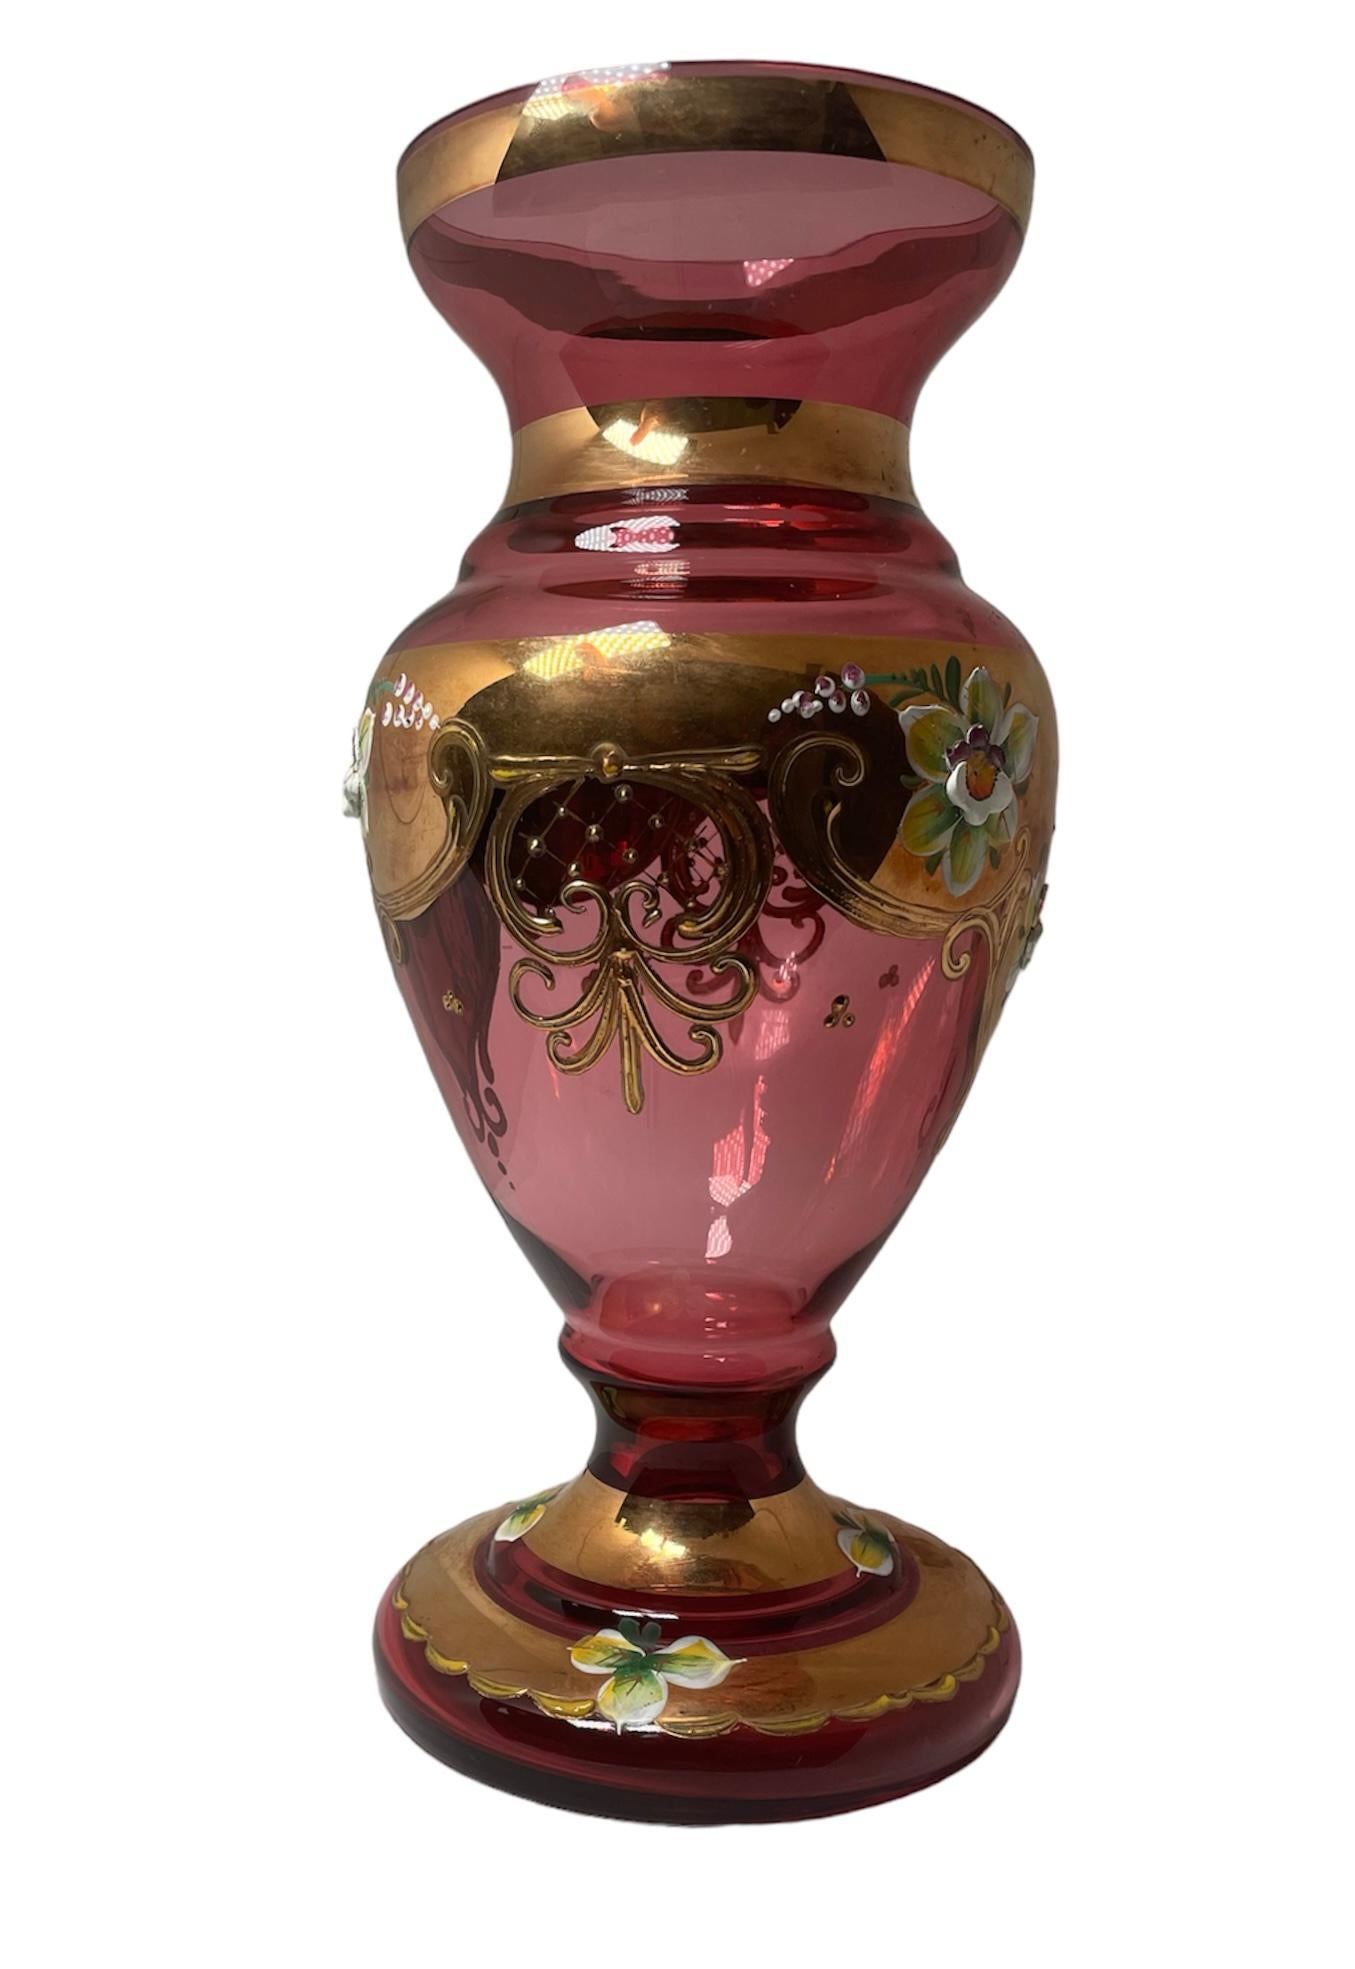 This is a Czech Bohemian Gilt Glass Vase. It depicts a light cranberry color glass vase decorated with hand painted enamel large flowers and gilt scrolls. A gilt scalloped garland with enamel leaves adorned the round base.